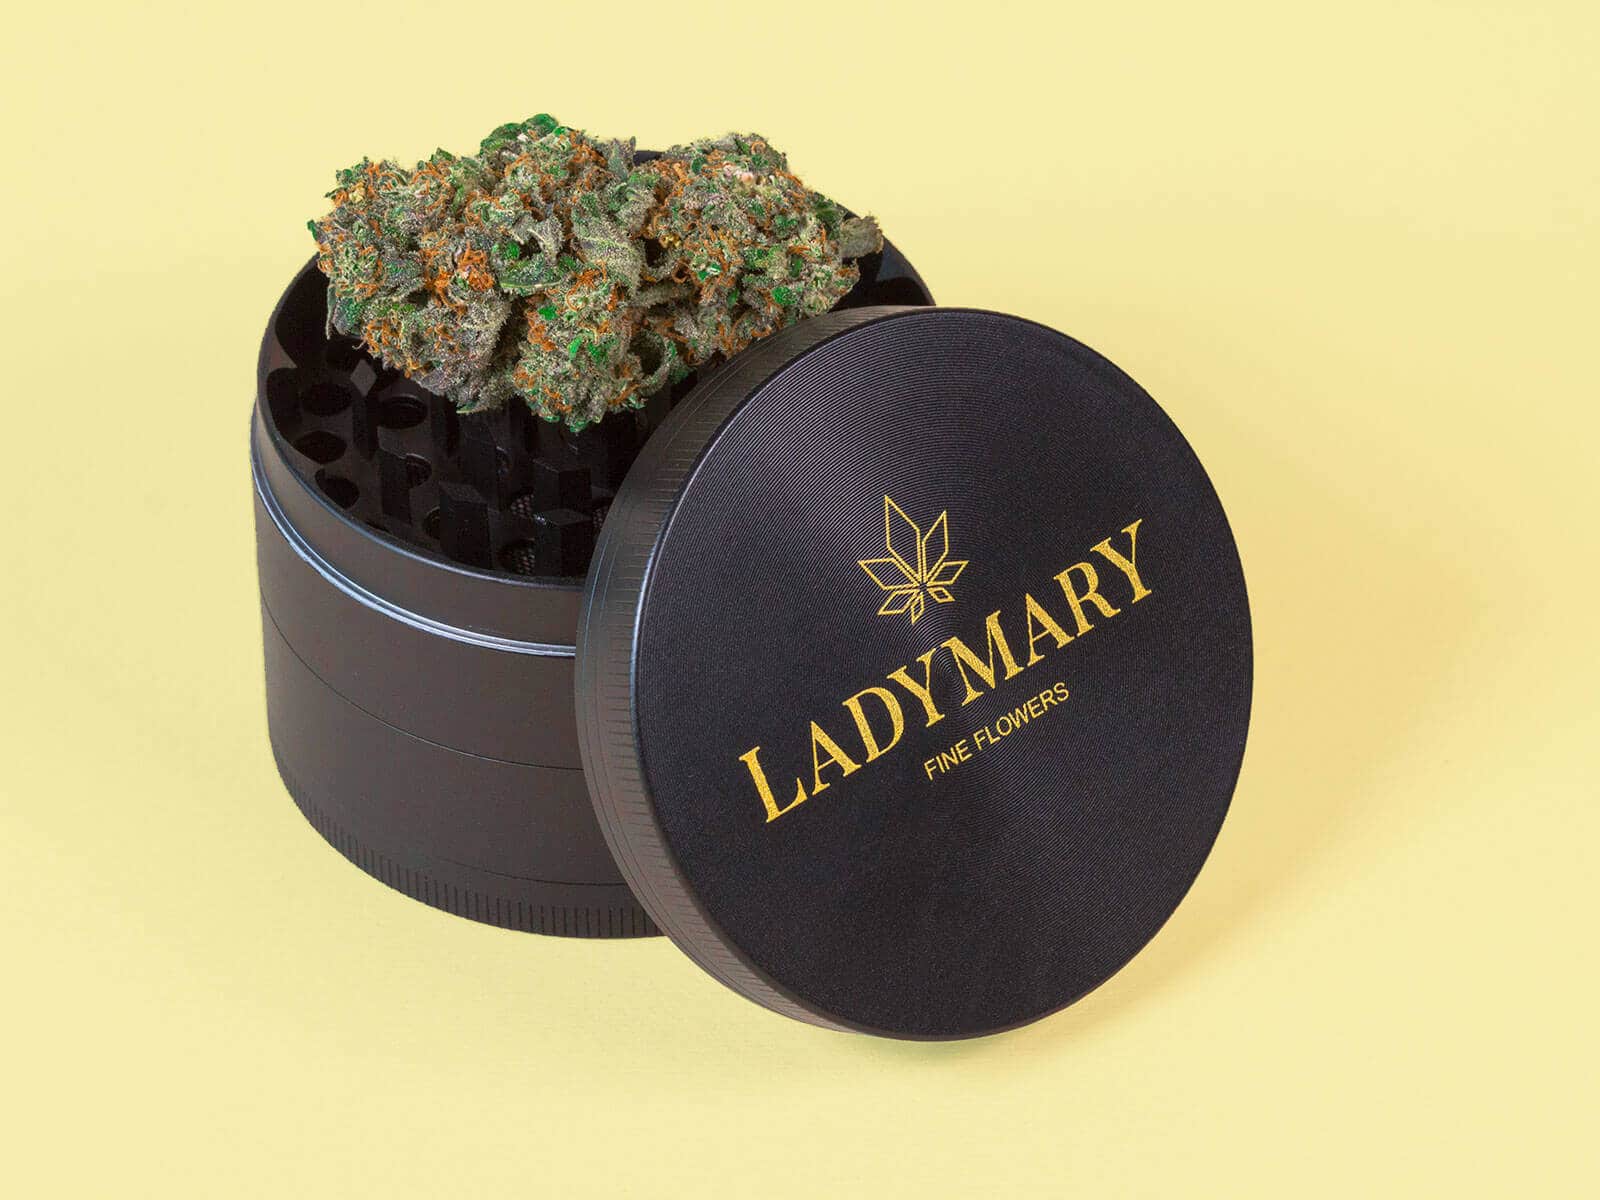 Cannabis Grinder for hardcore weed smoker - LadyMary legal weed